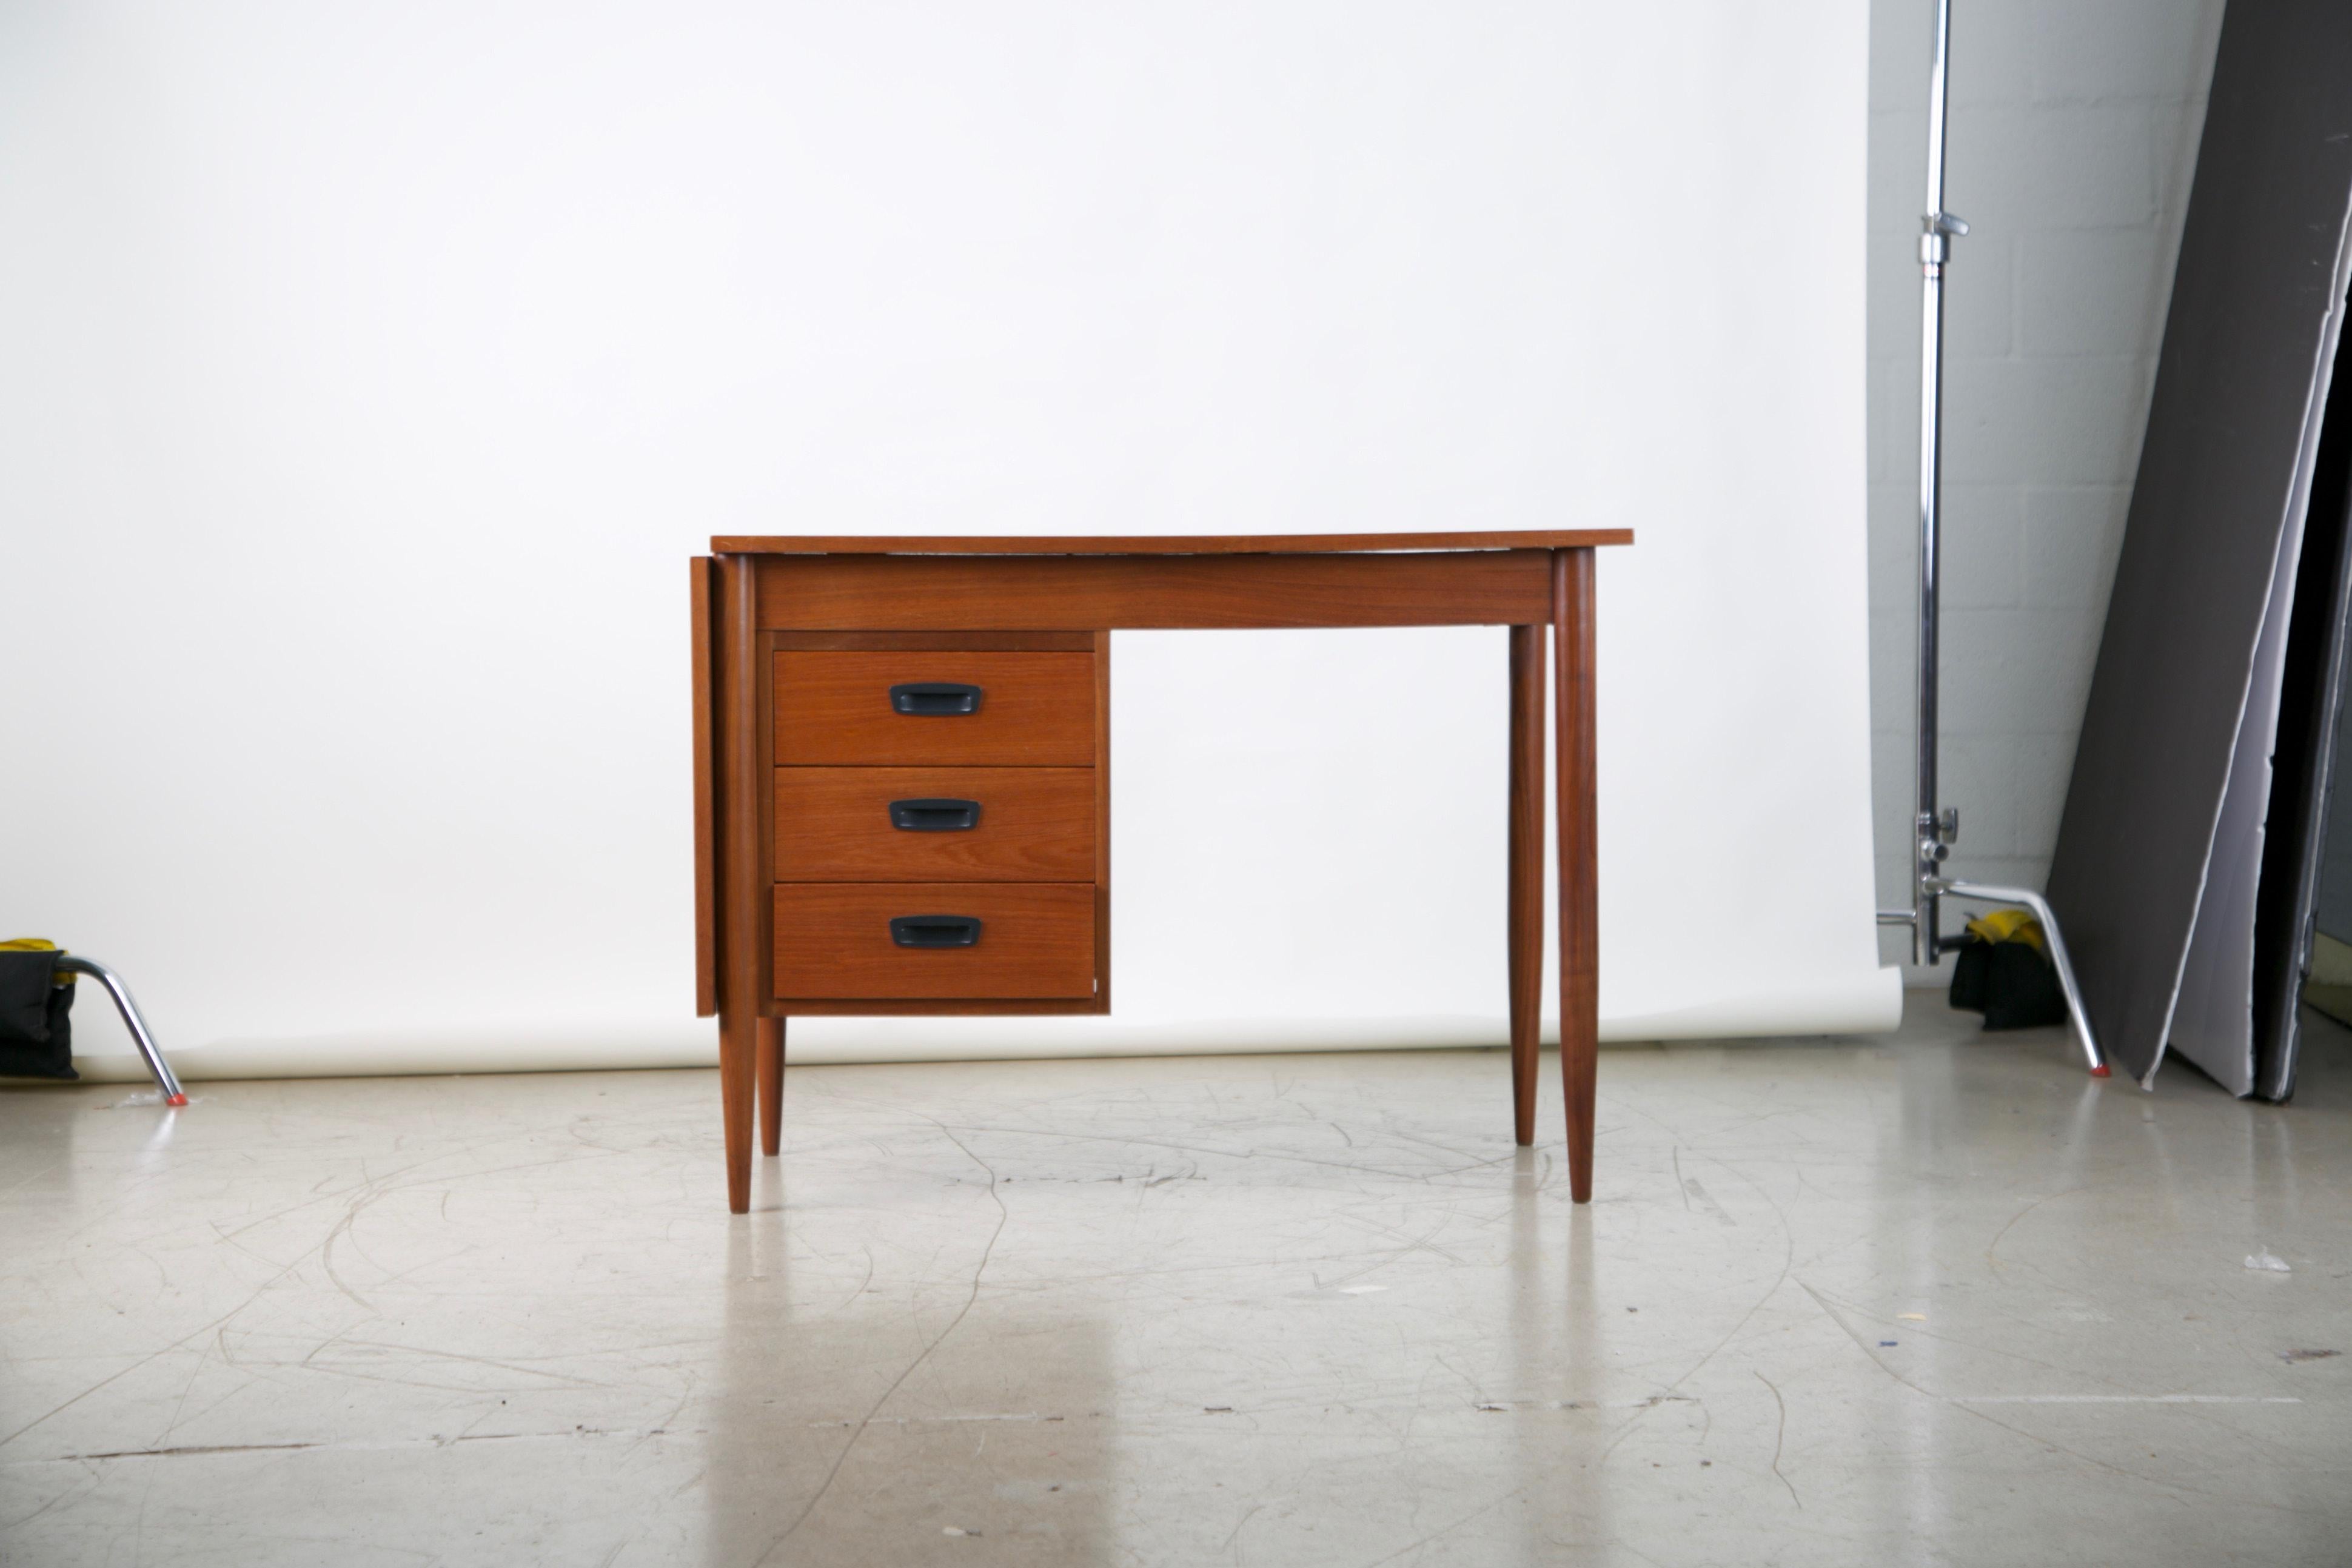 Elegantly designed Danish modern teak expandable drop-leaf desk. Fabricated from teak which displays an admirable grain with a variety of movement. This compact desk is perfect for an interior which is tight on space. Featuring slender proportions